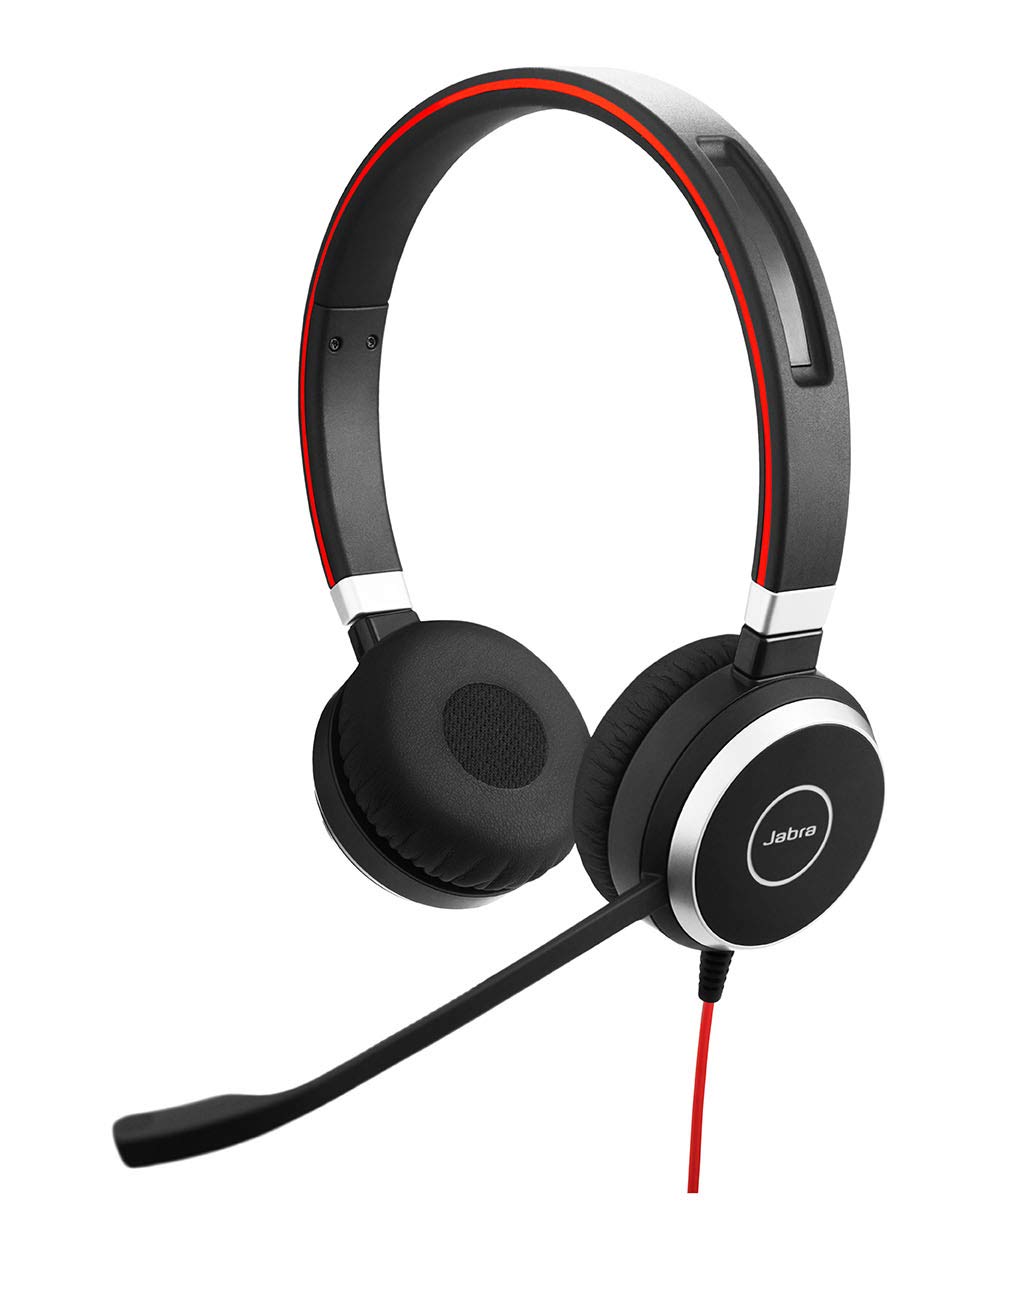 Jabra Evolve 40 Professional Wired Headset, Stereo, UC-Optimized – Telephone Headset for Greater Productivity, Superior Sound for Calls and Music, 3.5mm Jack/USB Connection, All-Day Comfort Design